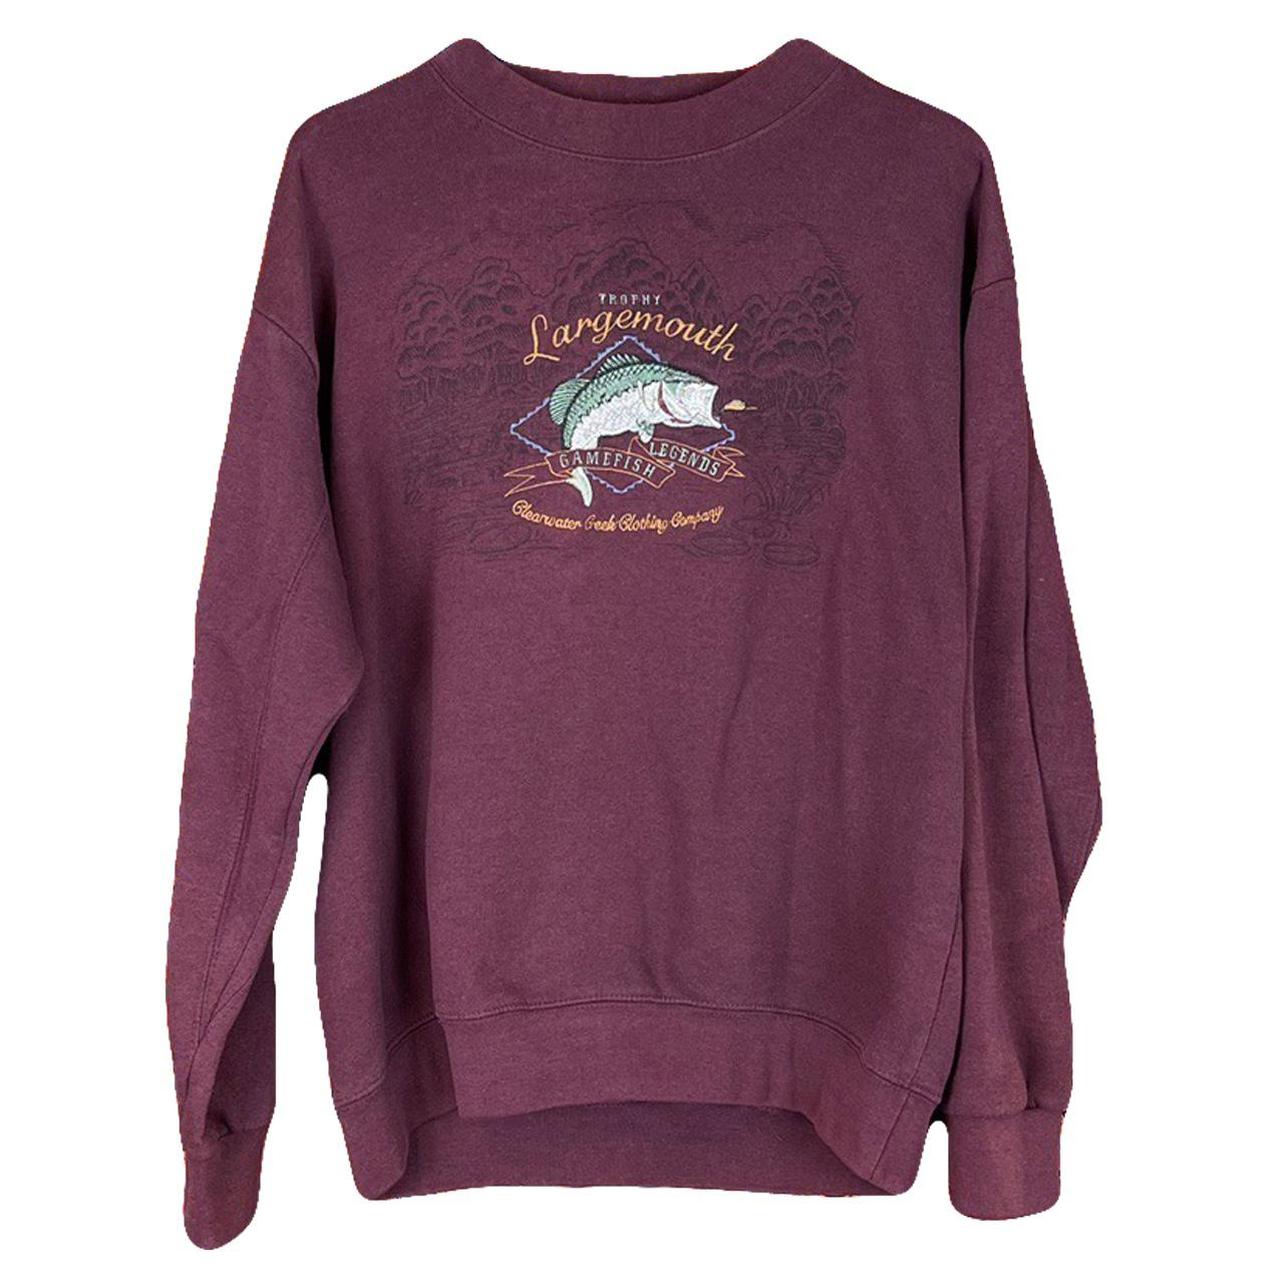 Product Image 1 - Fishing embroidered crew neck

🌊Free shipping